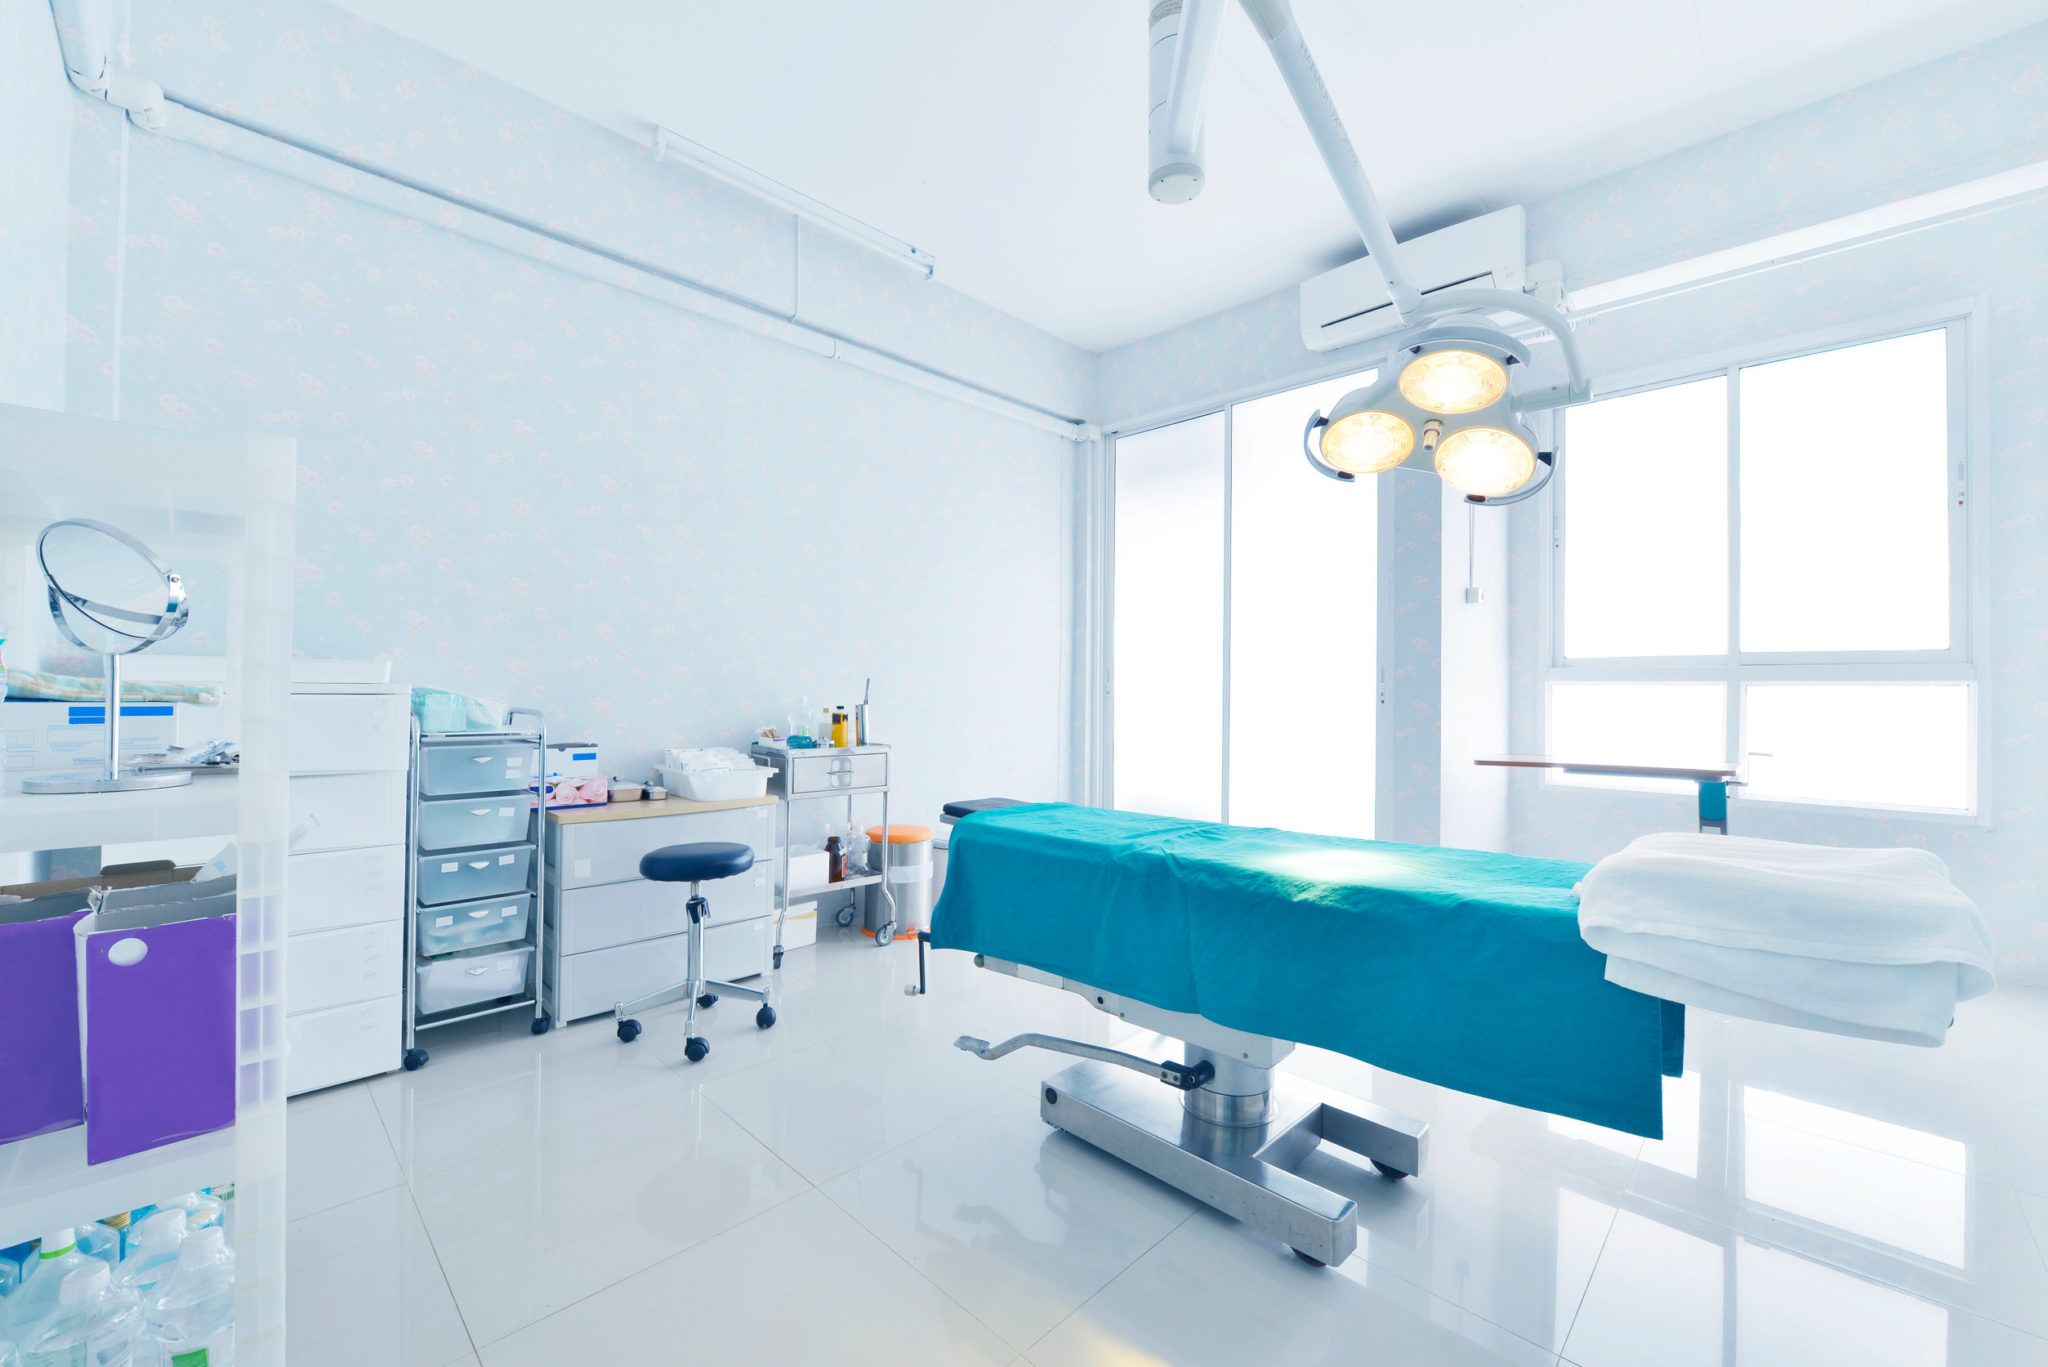 Interior view of the operating room in blue tone